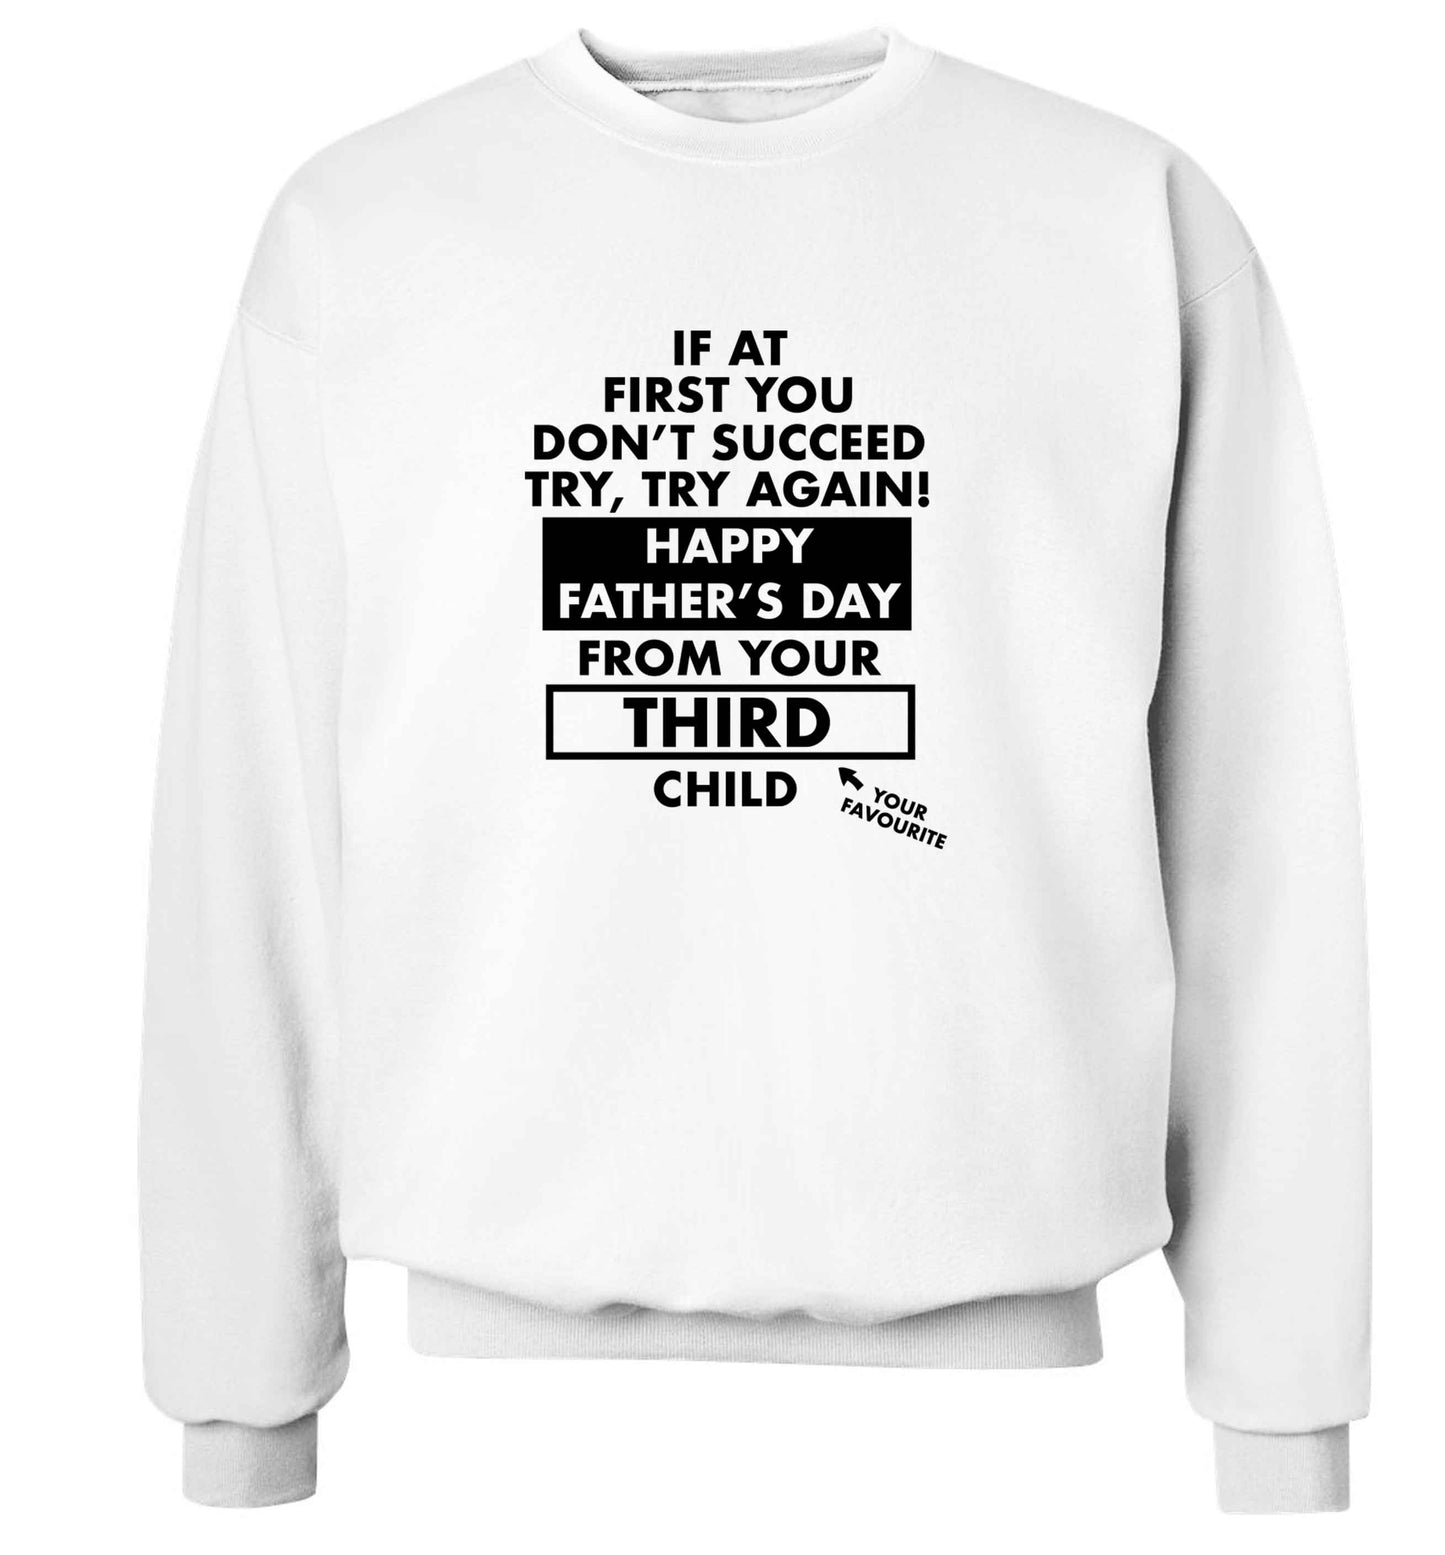 If at first you don't succeed try, try again Happy Father's day from your third child! adult's unisex white sweater 2XL